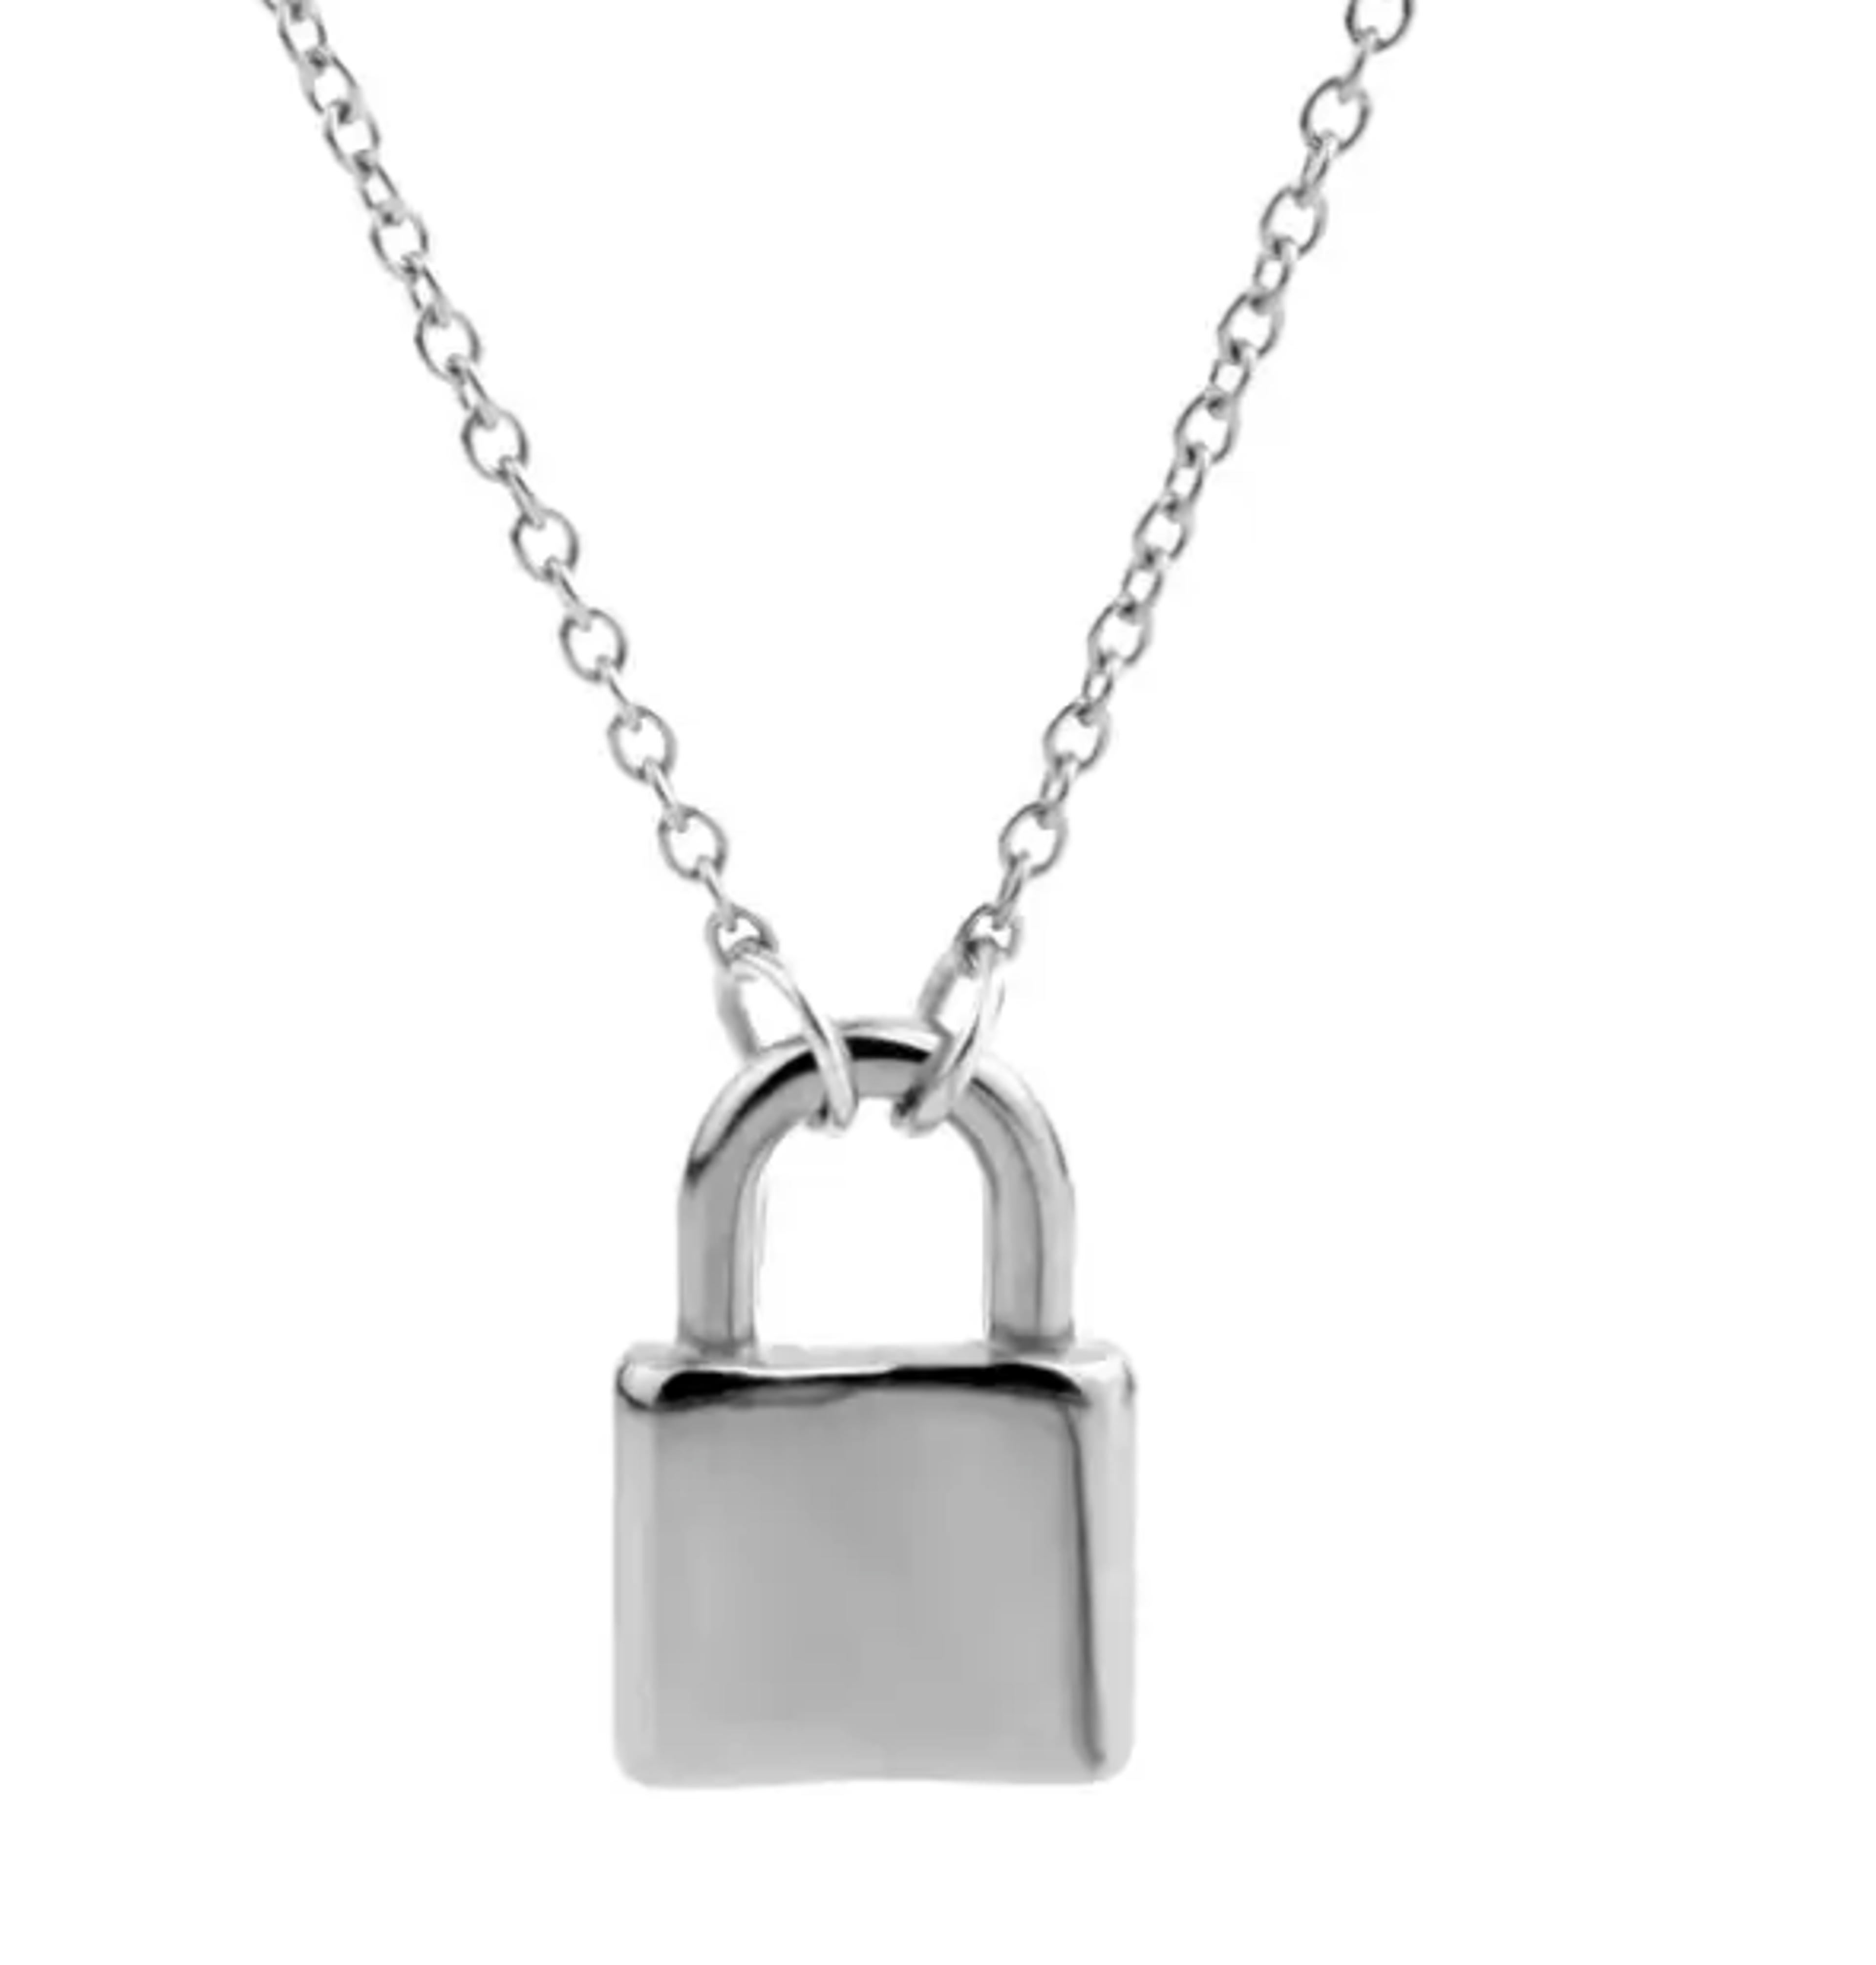 Alternate View 4 of NEW KimmieBBags Padlock Charm Necklace 061923